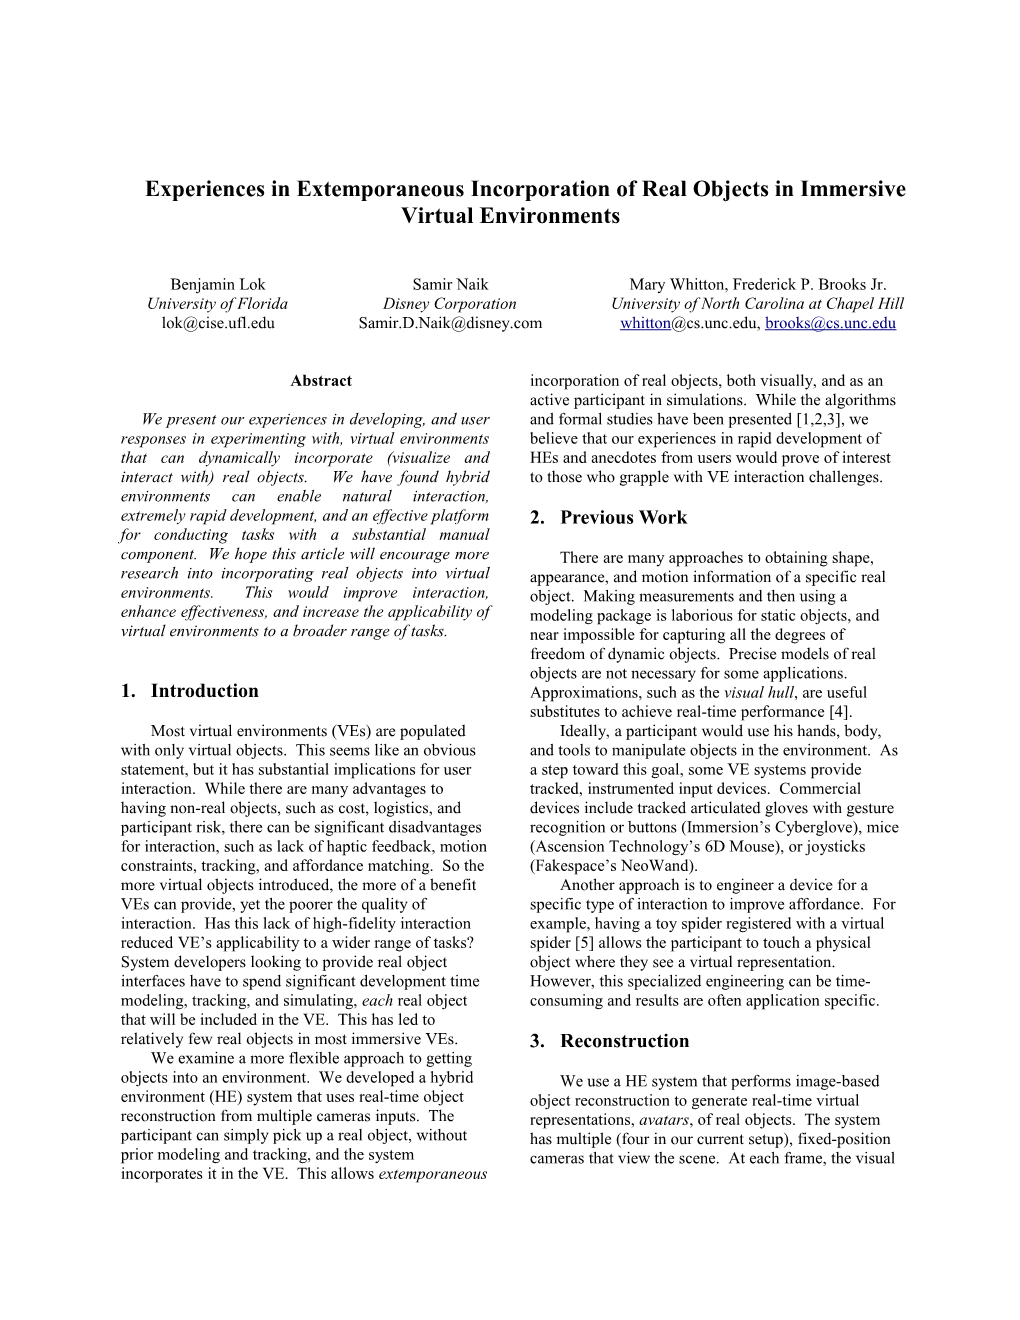 Extemporaneous Inclusion of Real Objects As a Virtual Environments Interface